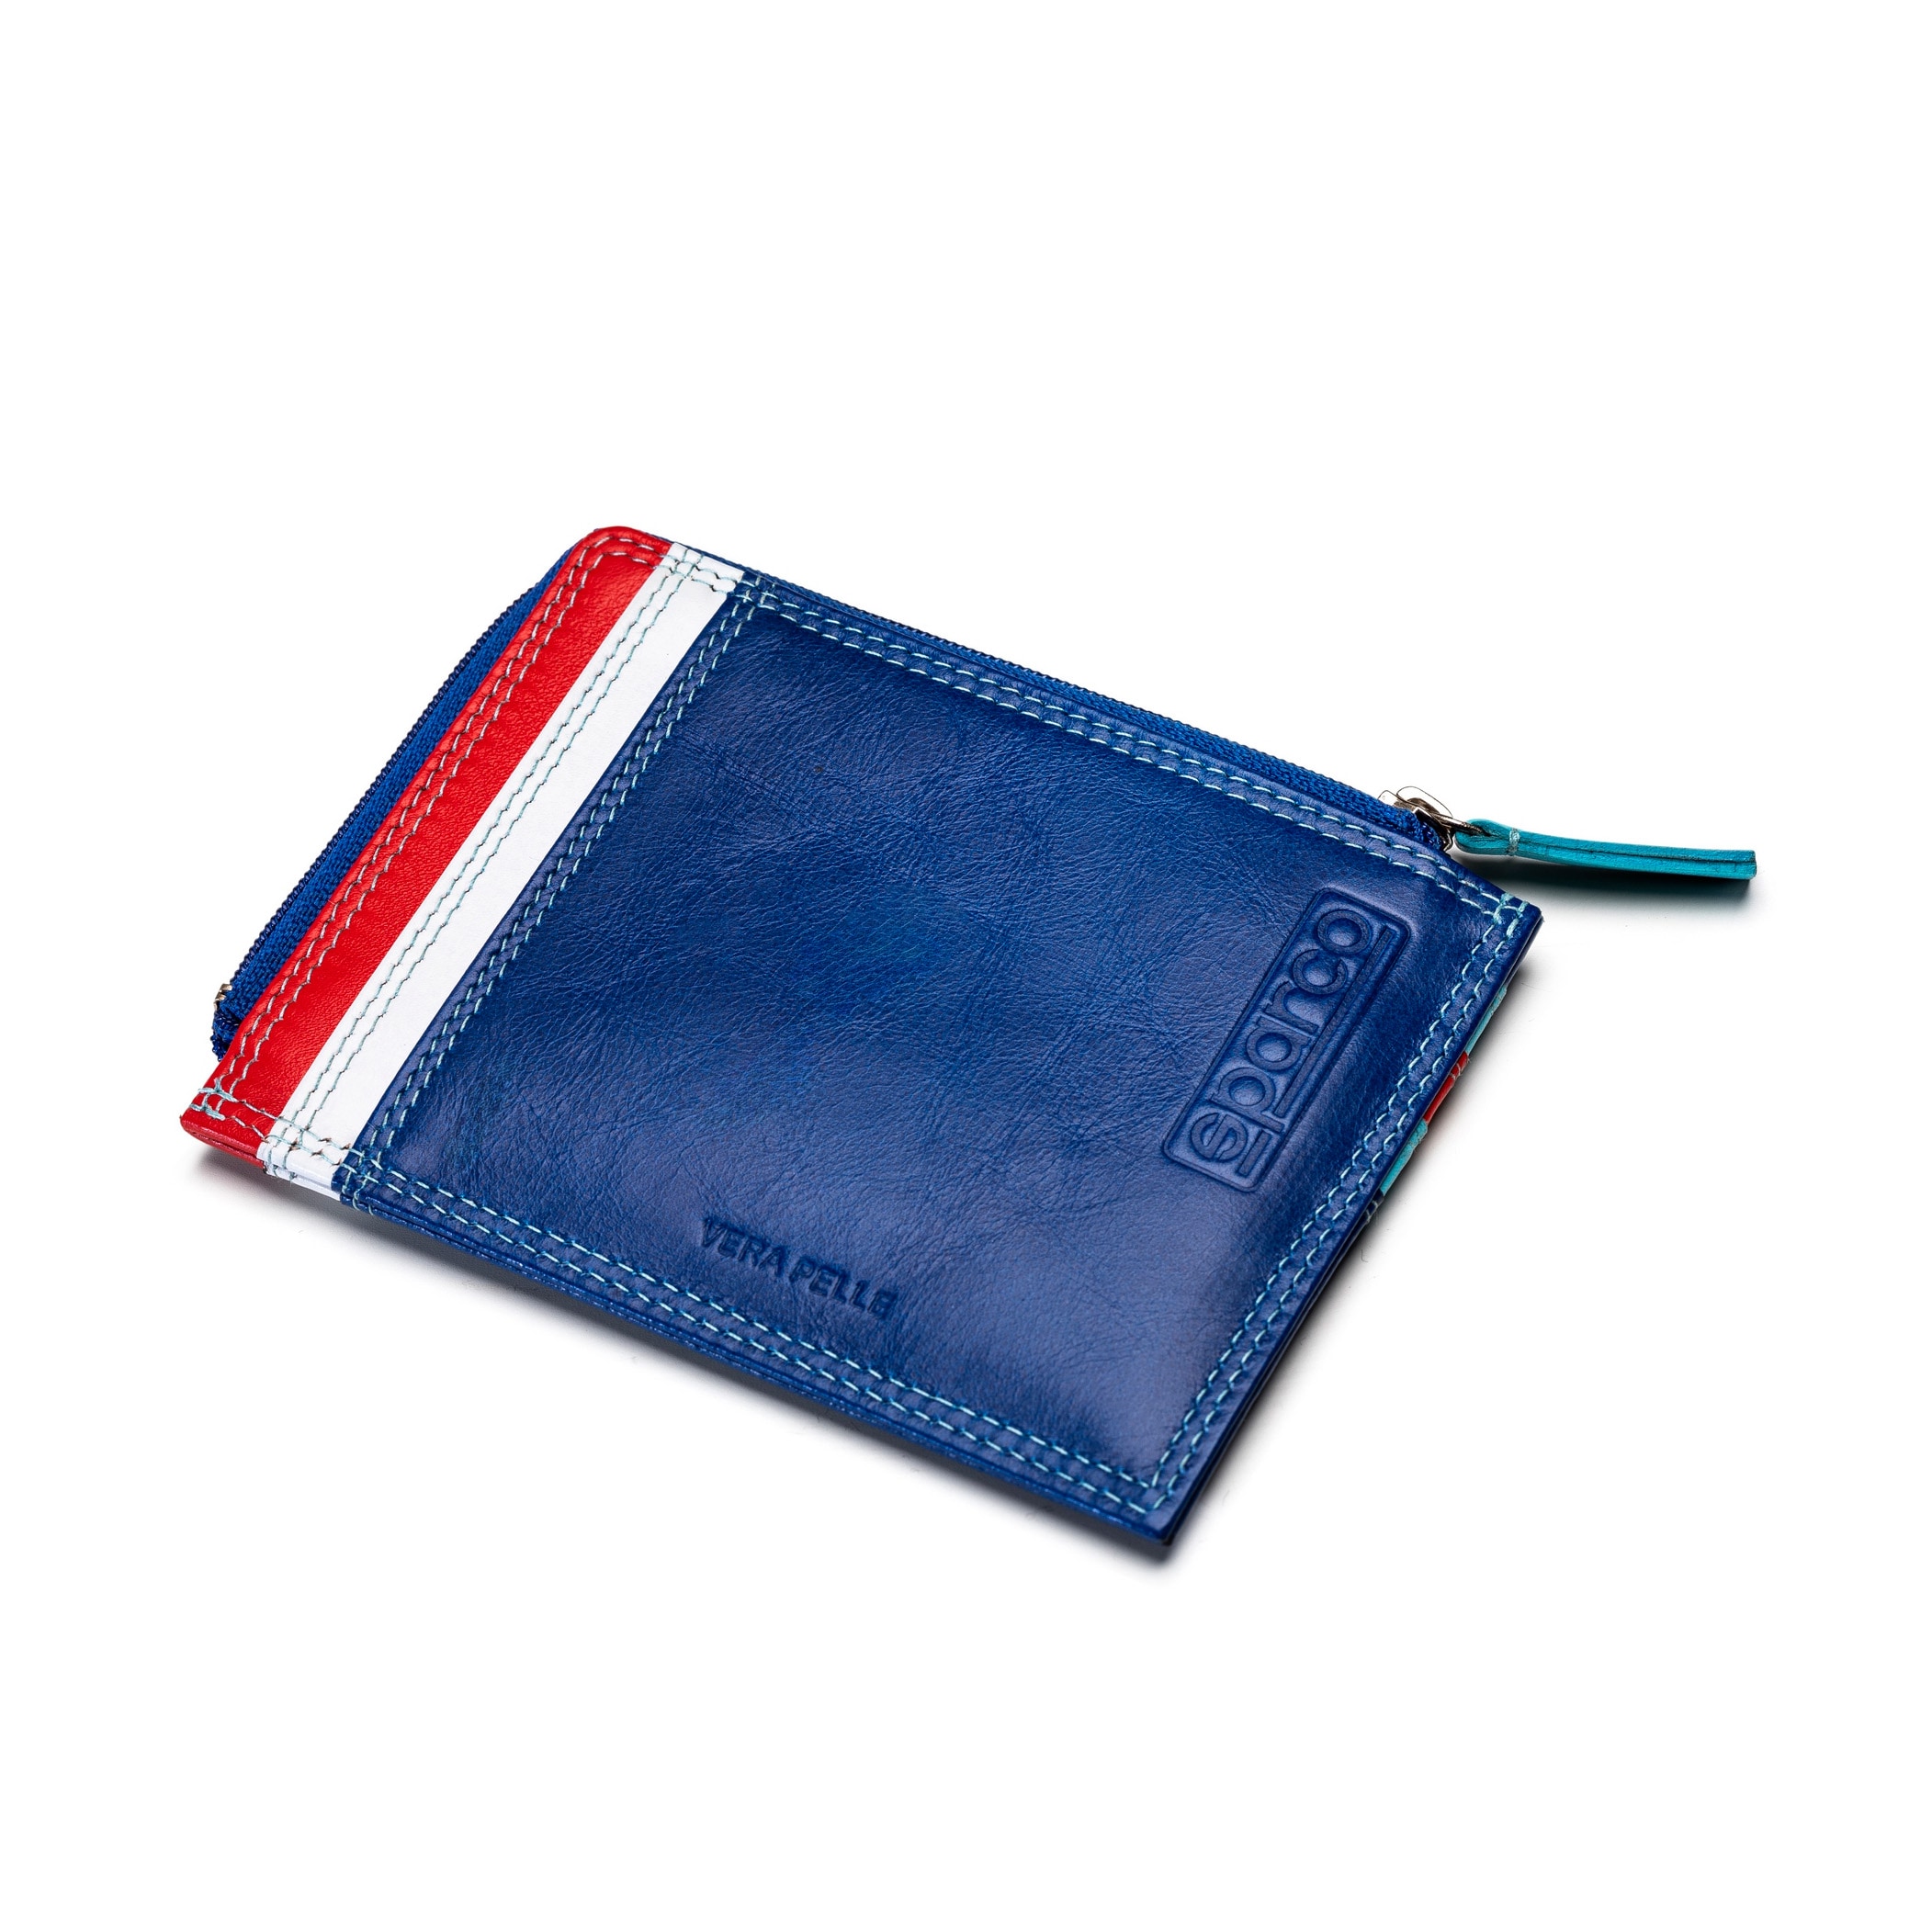 Wallet Sparco Leather Martini Racing